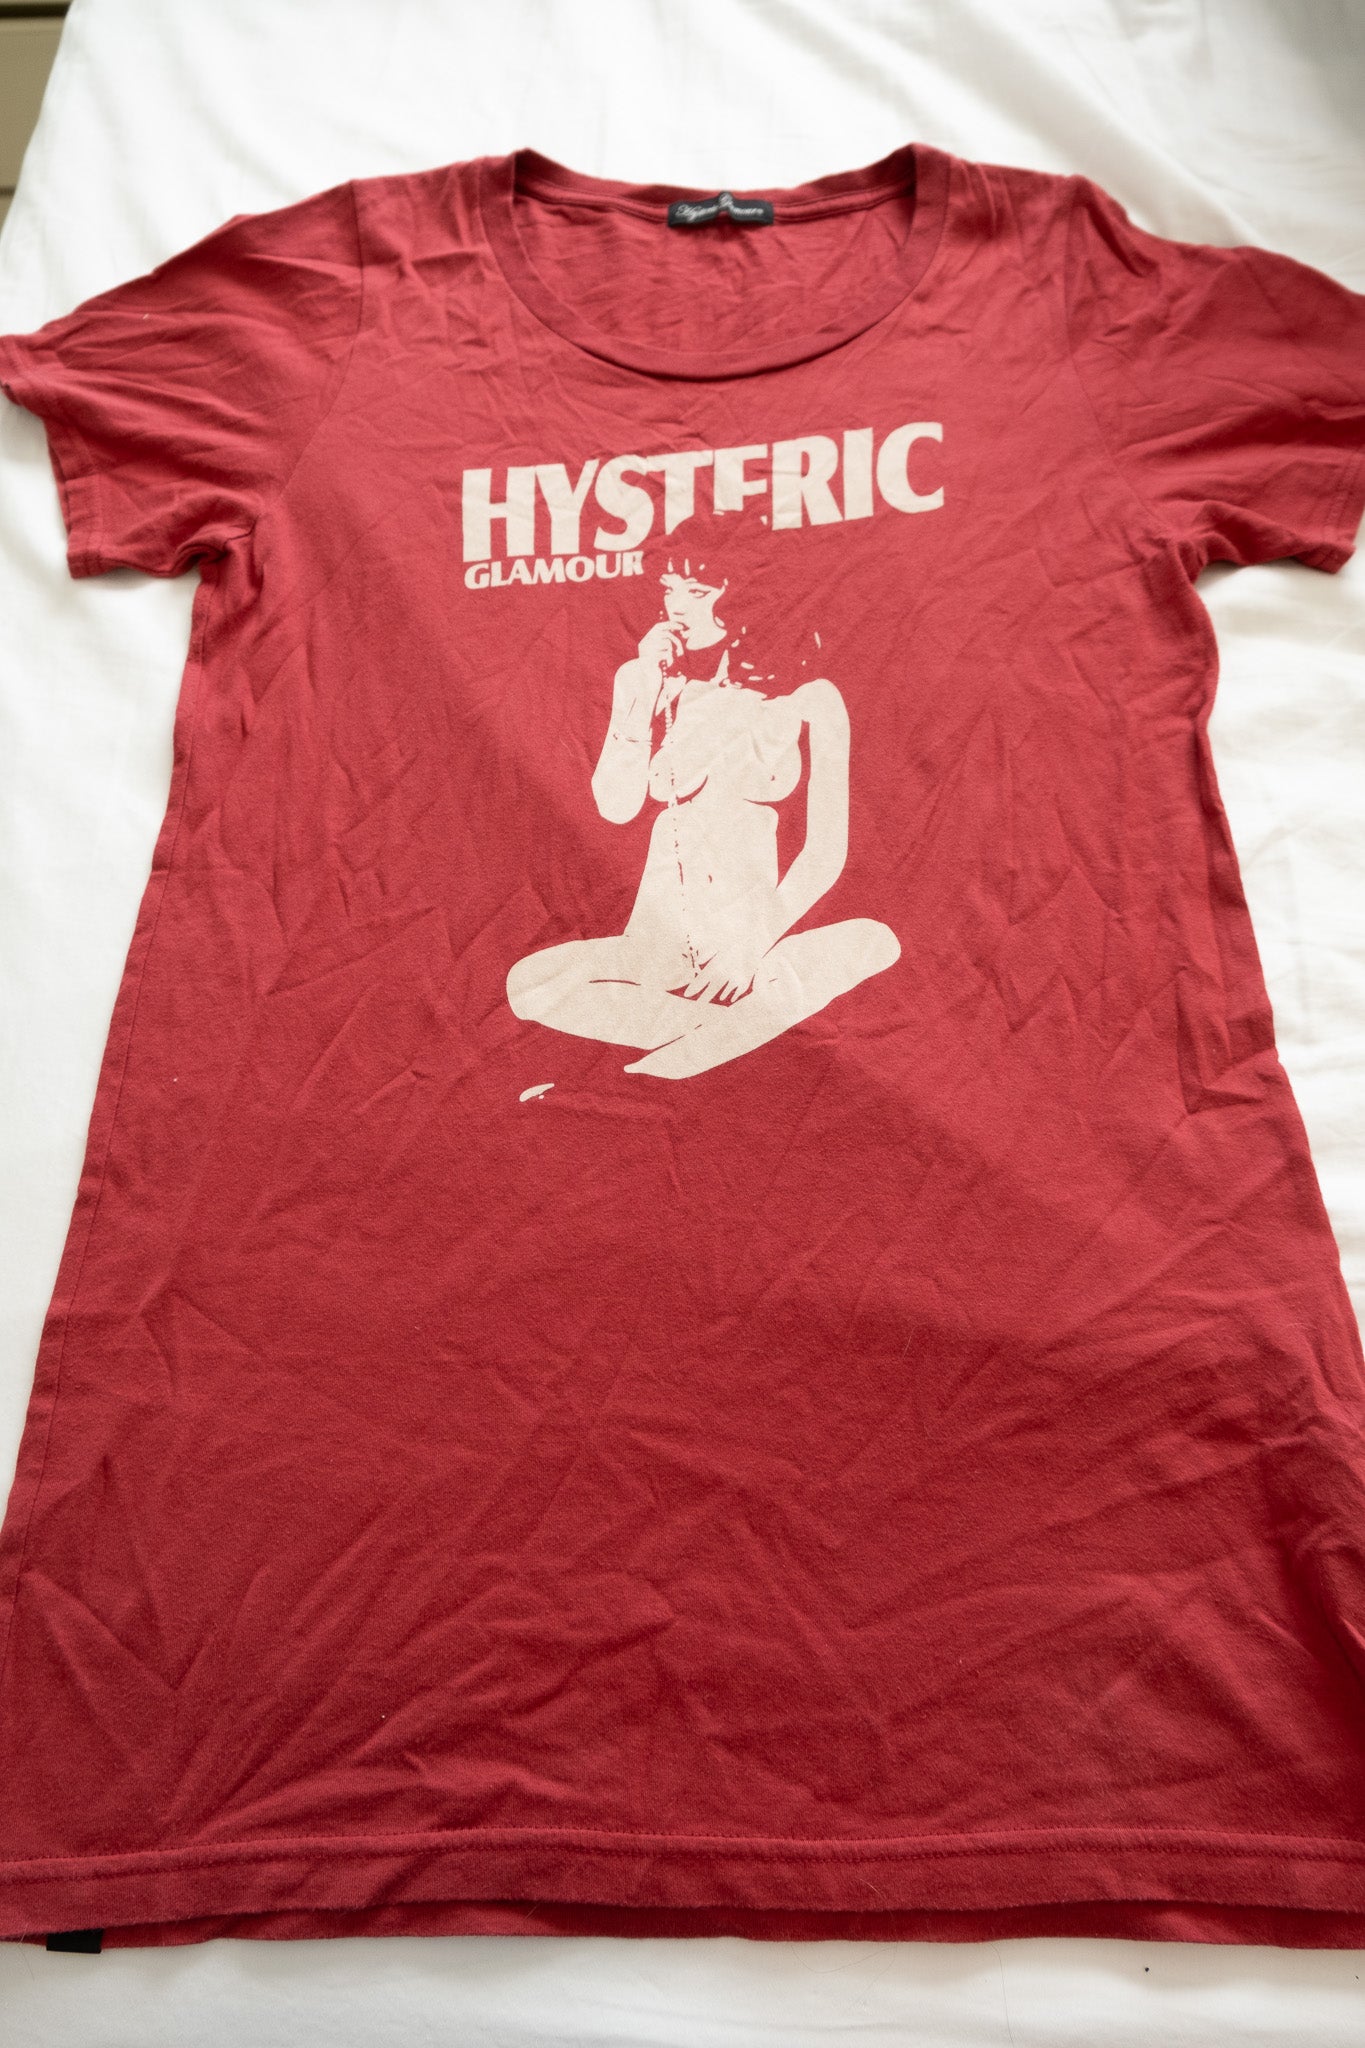 Hysteric Glamour T-Shirt